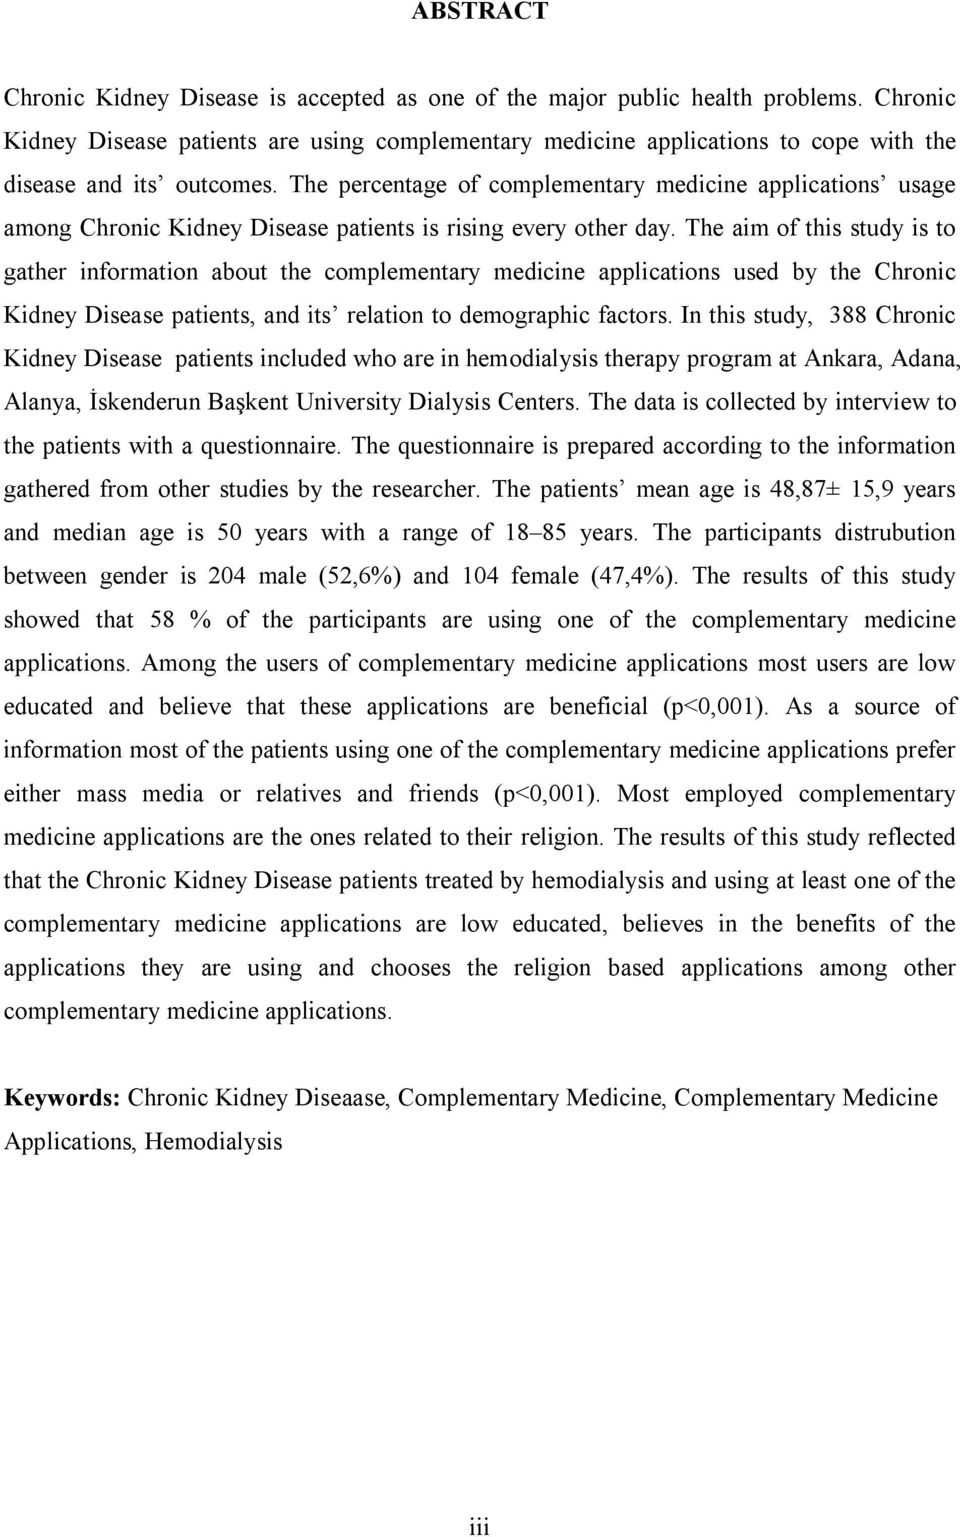 The percentage of complementary medicine applications usage among Chronic Kidney Disease patients is rising every other day.